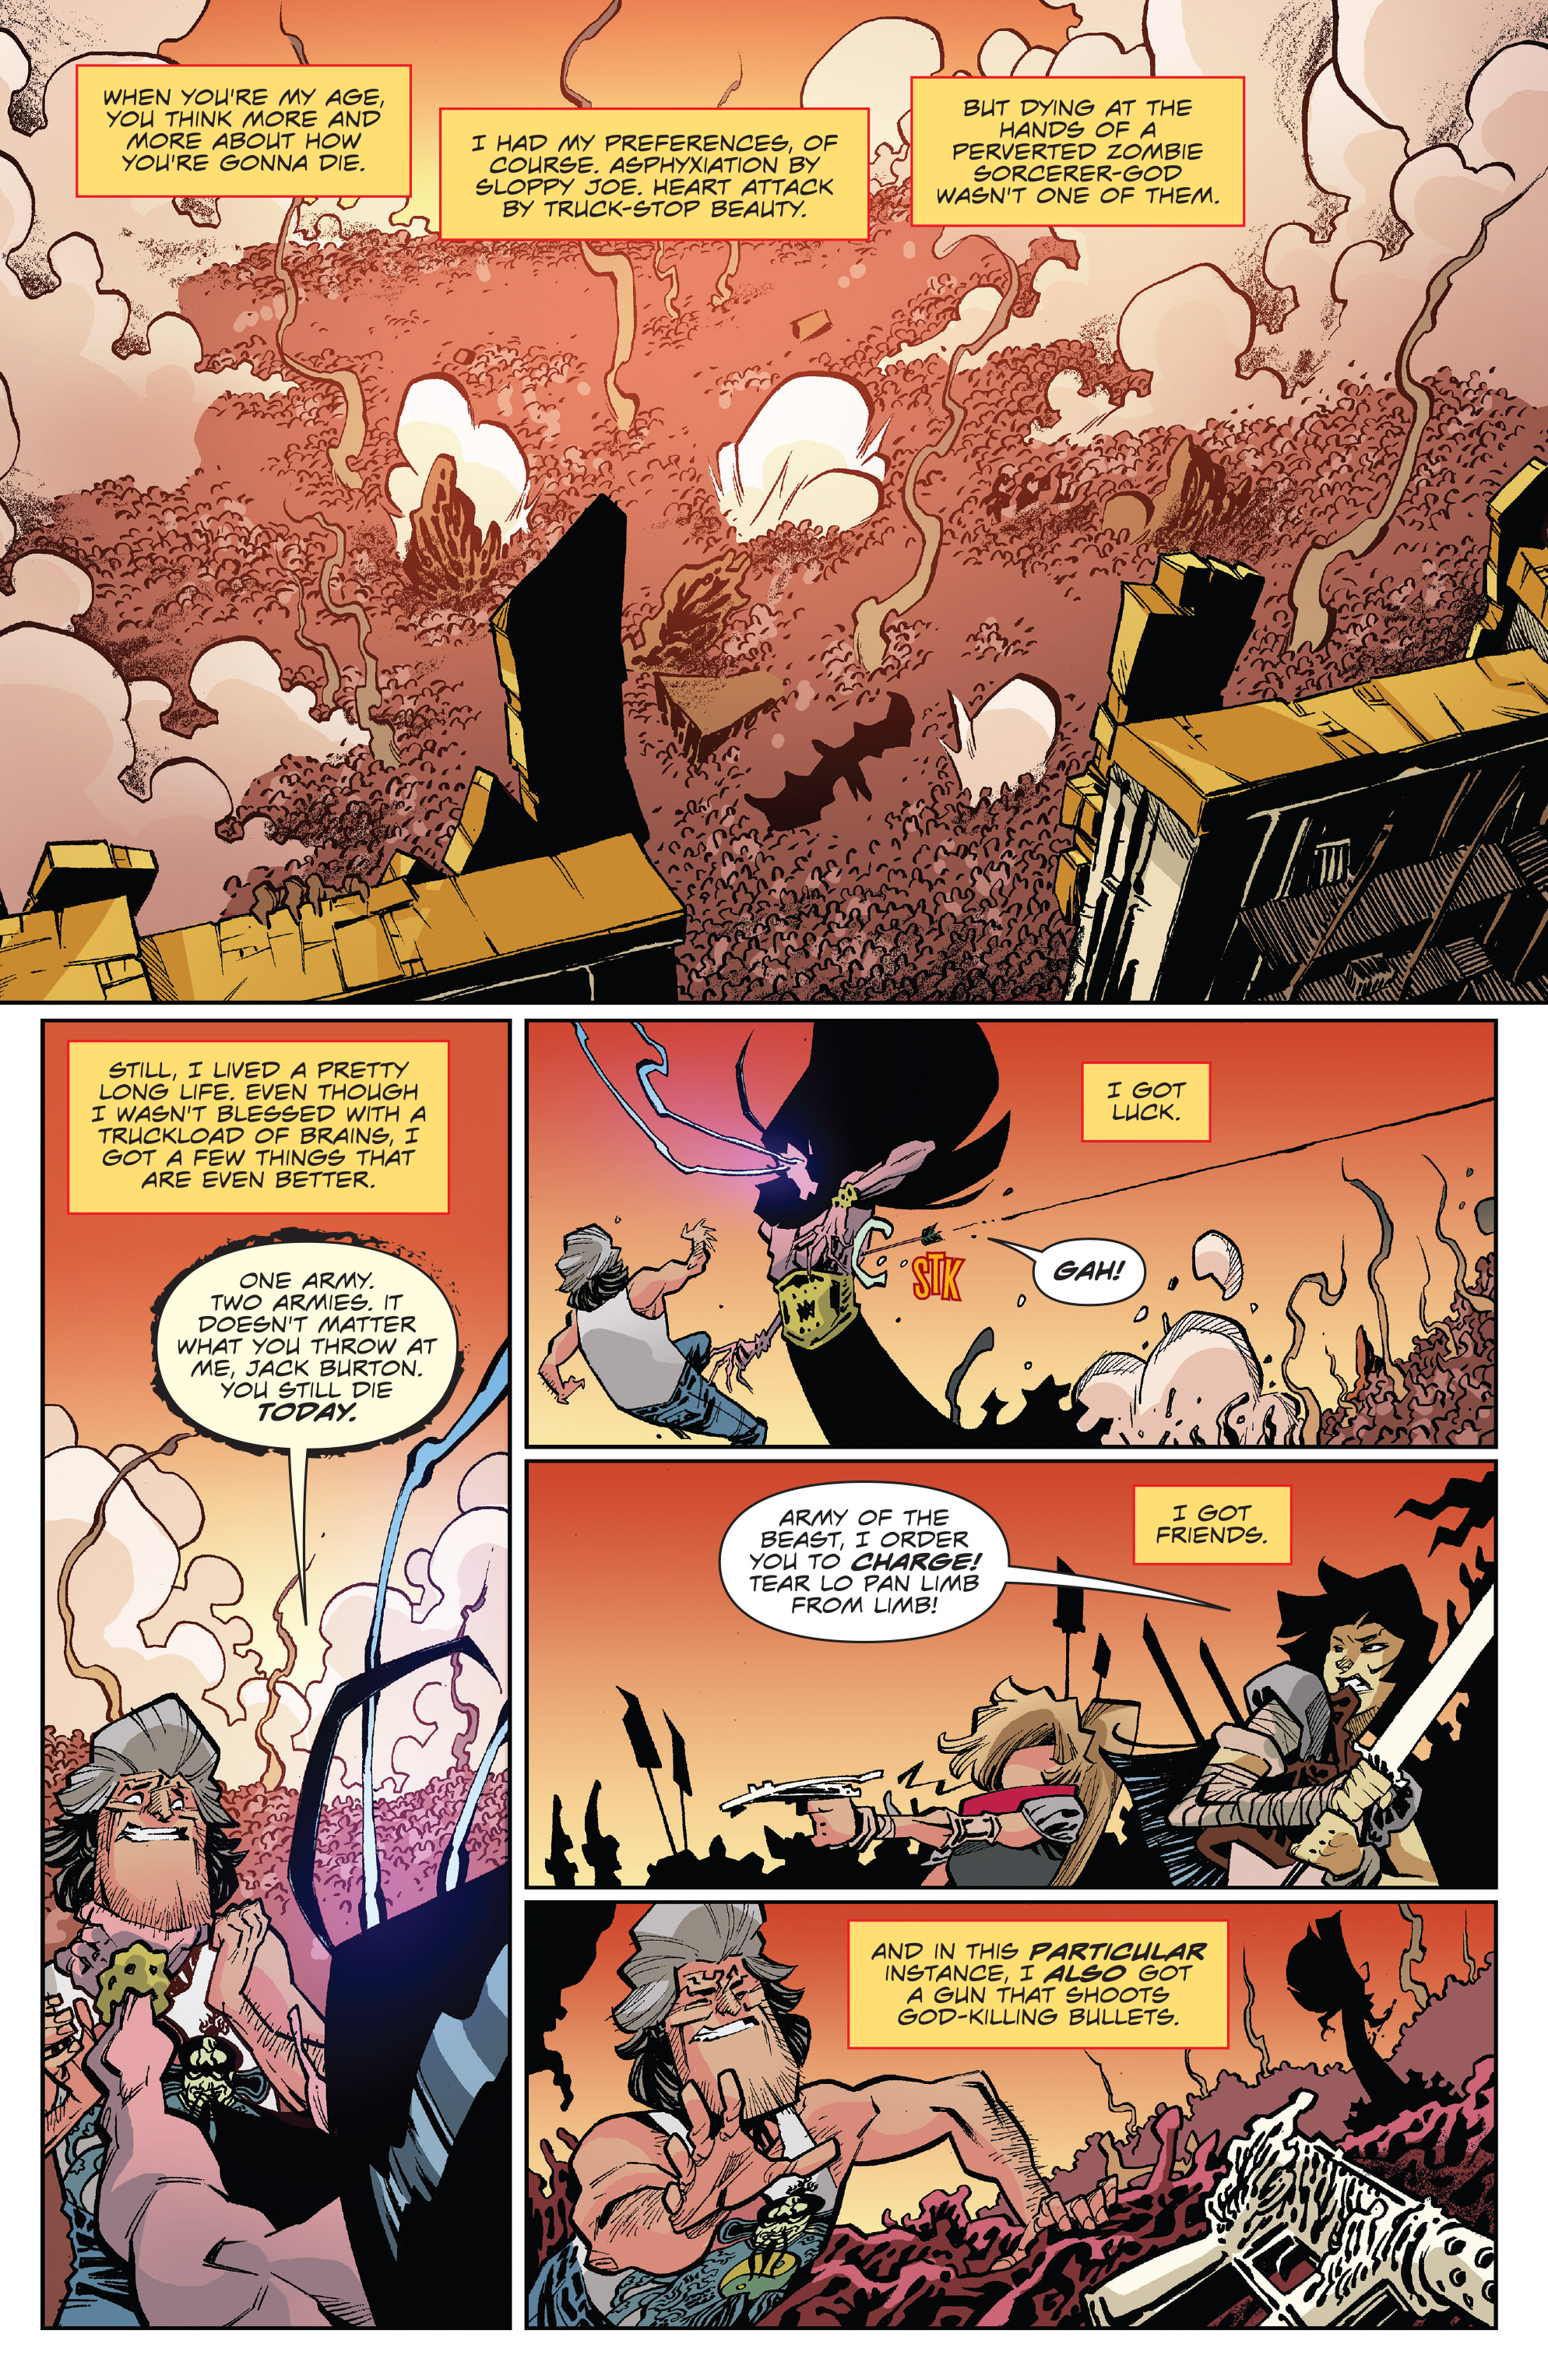 Big Trouble In Little China: Old Man Jack (2017): Chapter 12 - Page 3